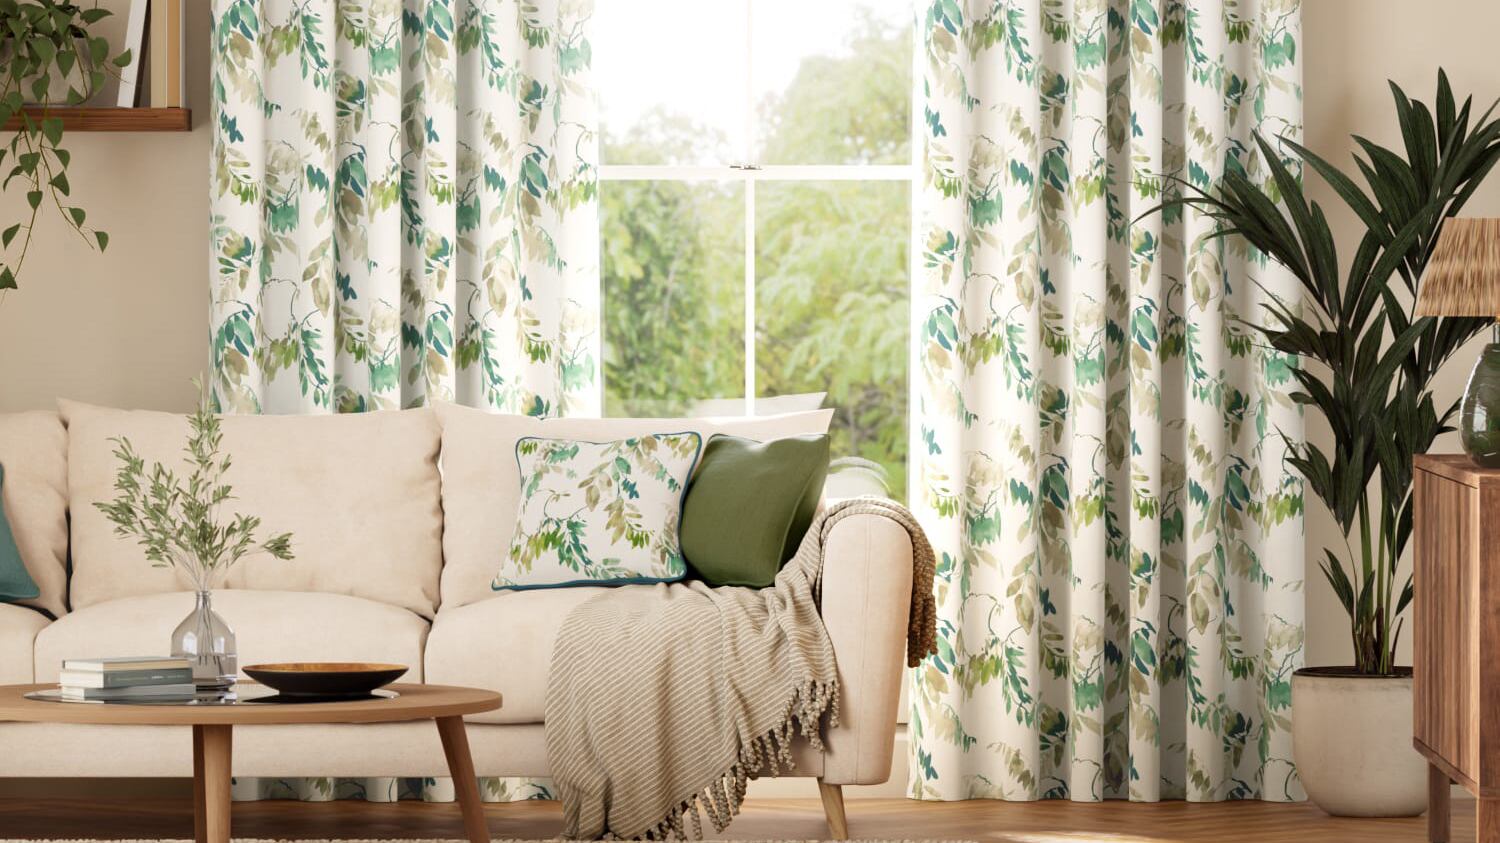 Keeping windows open and curtains closed can help keep your home cool